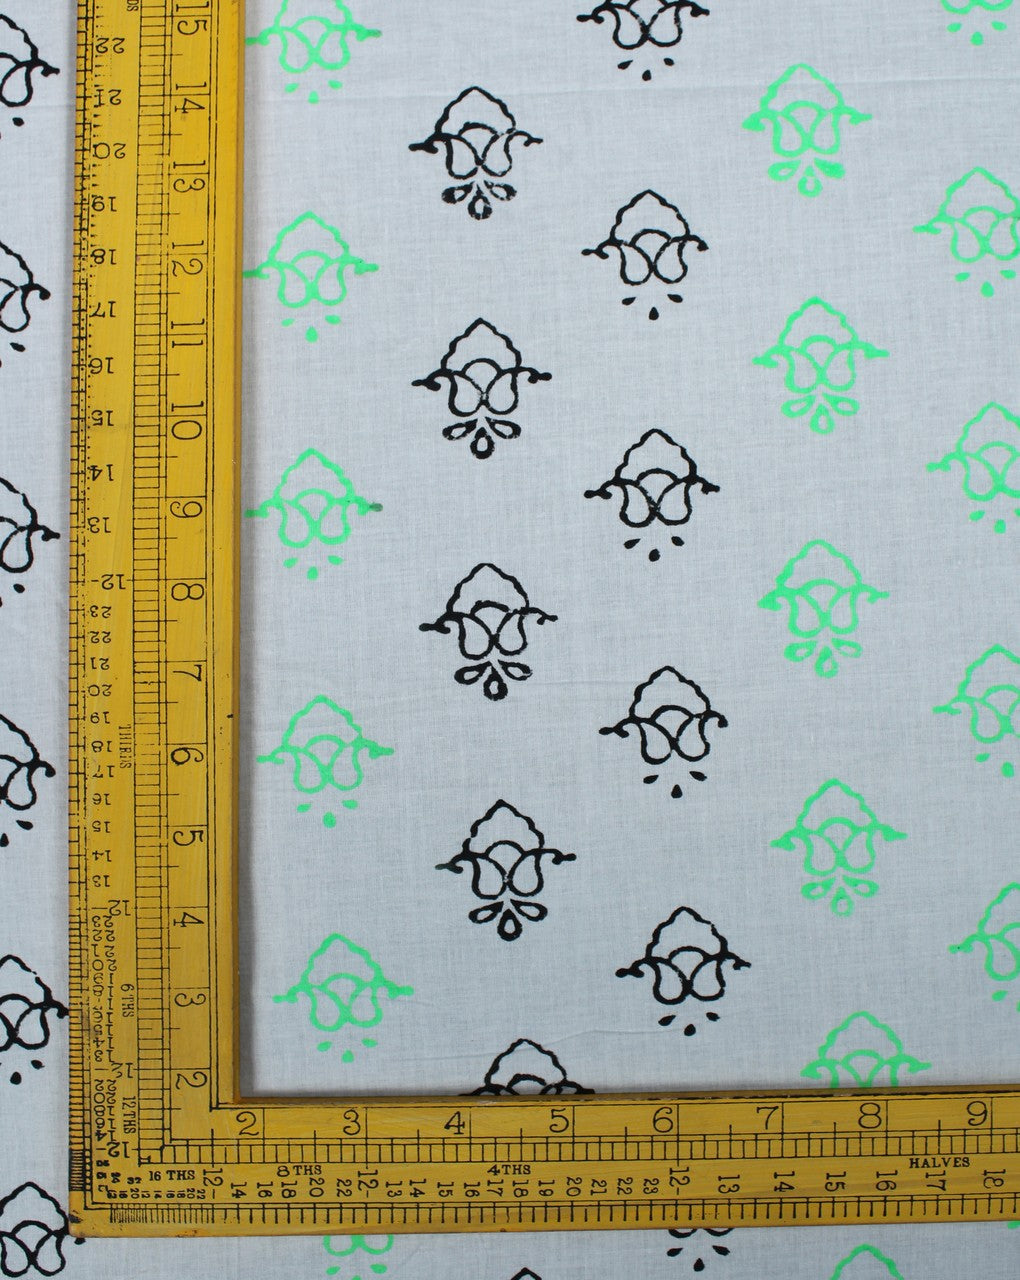 White And Green Abstract Design Cotton Cambric Fabric